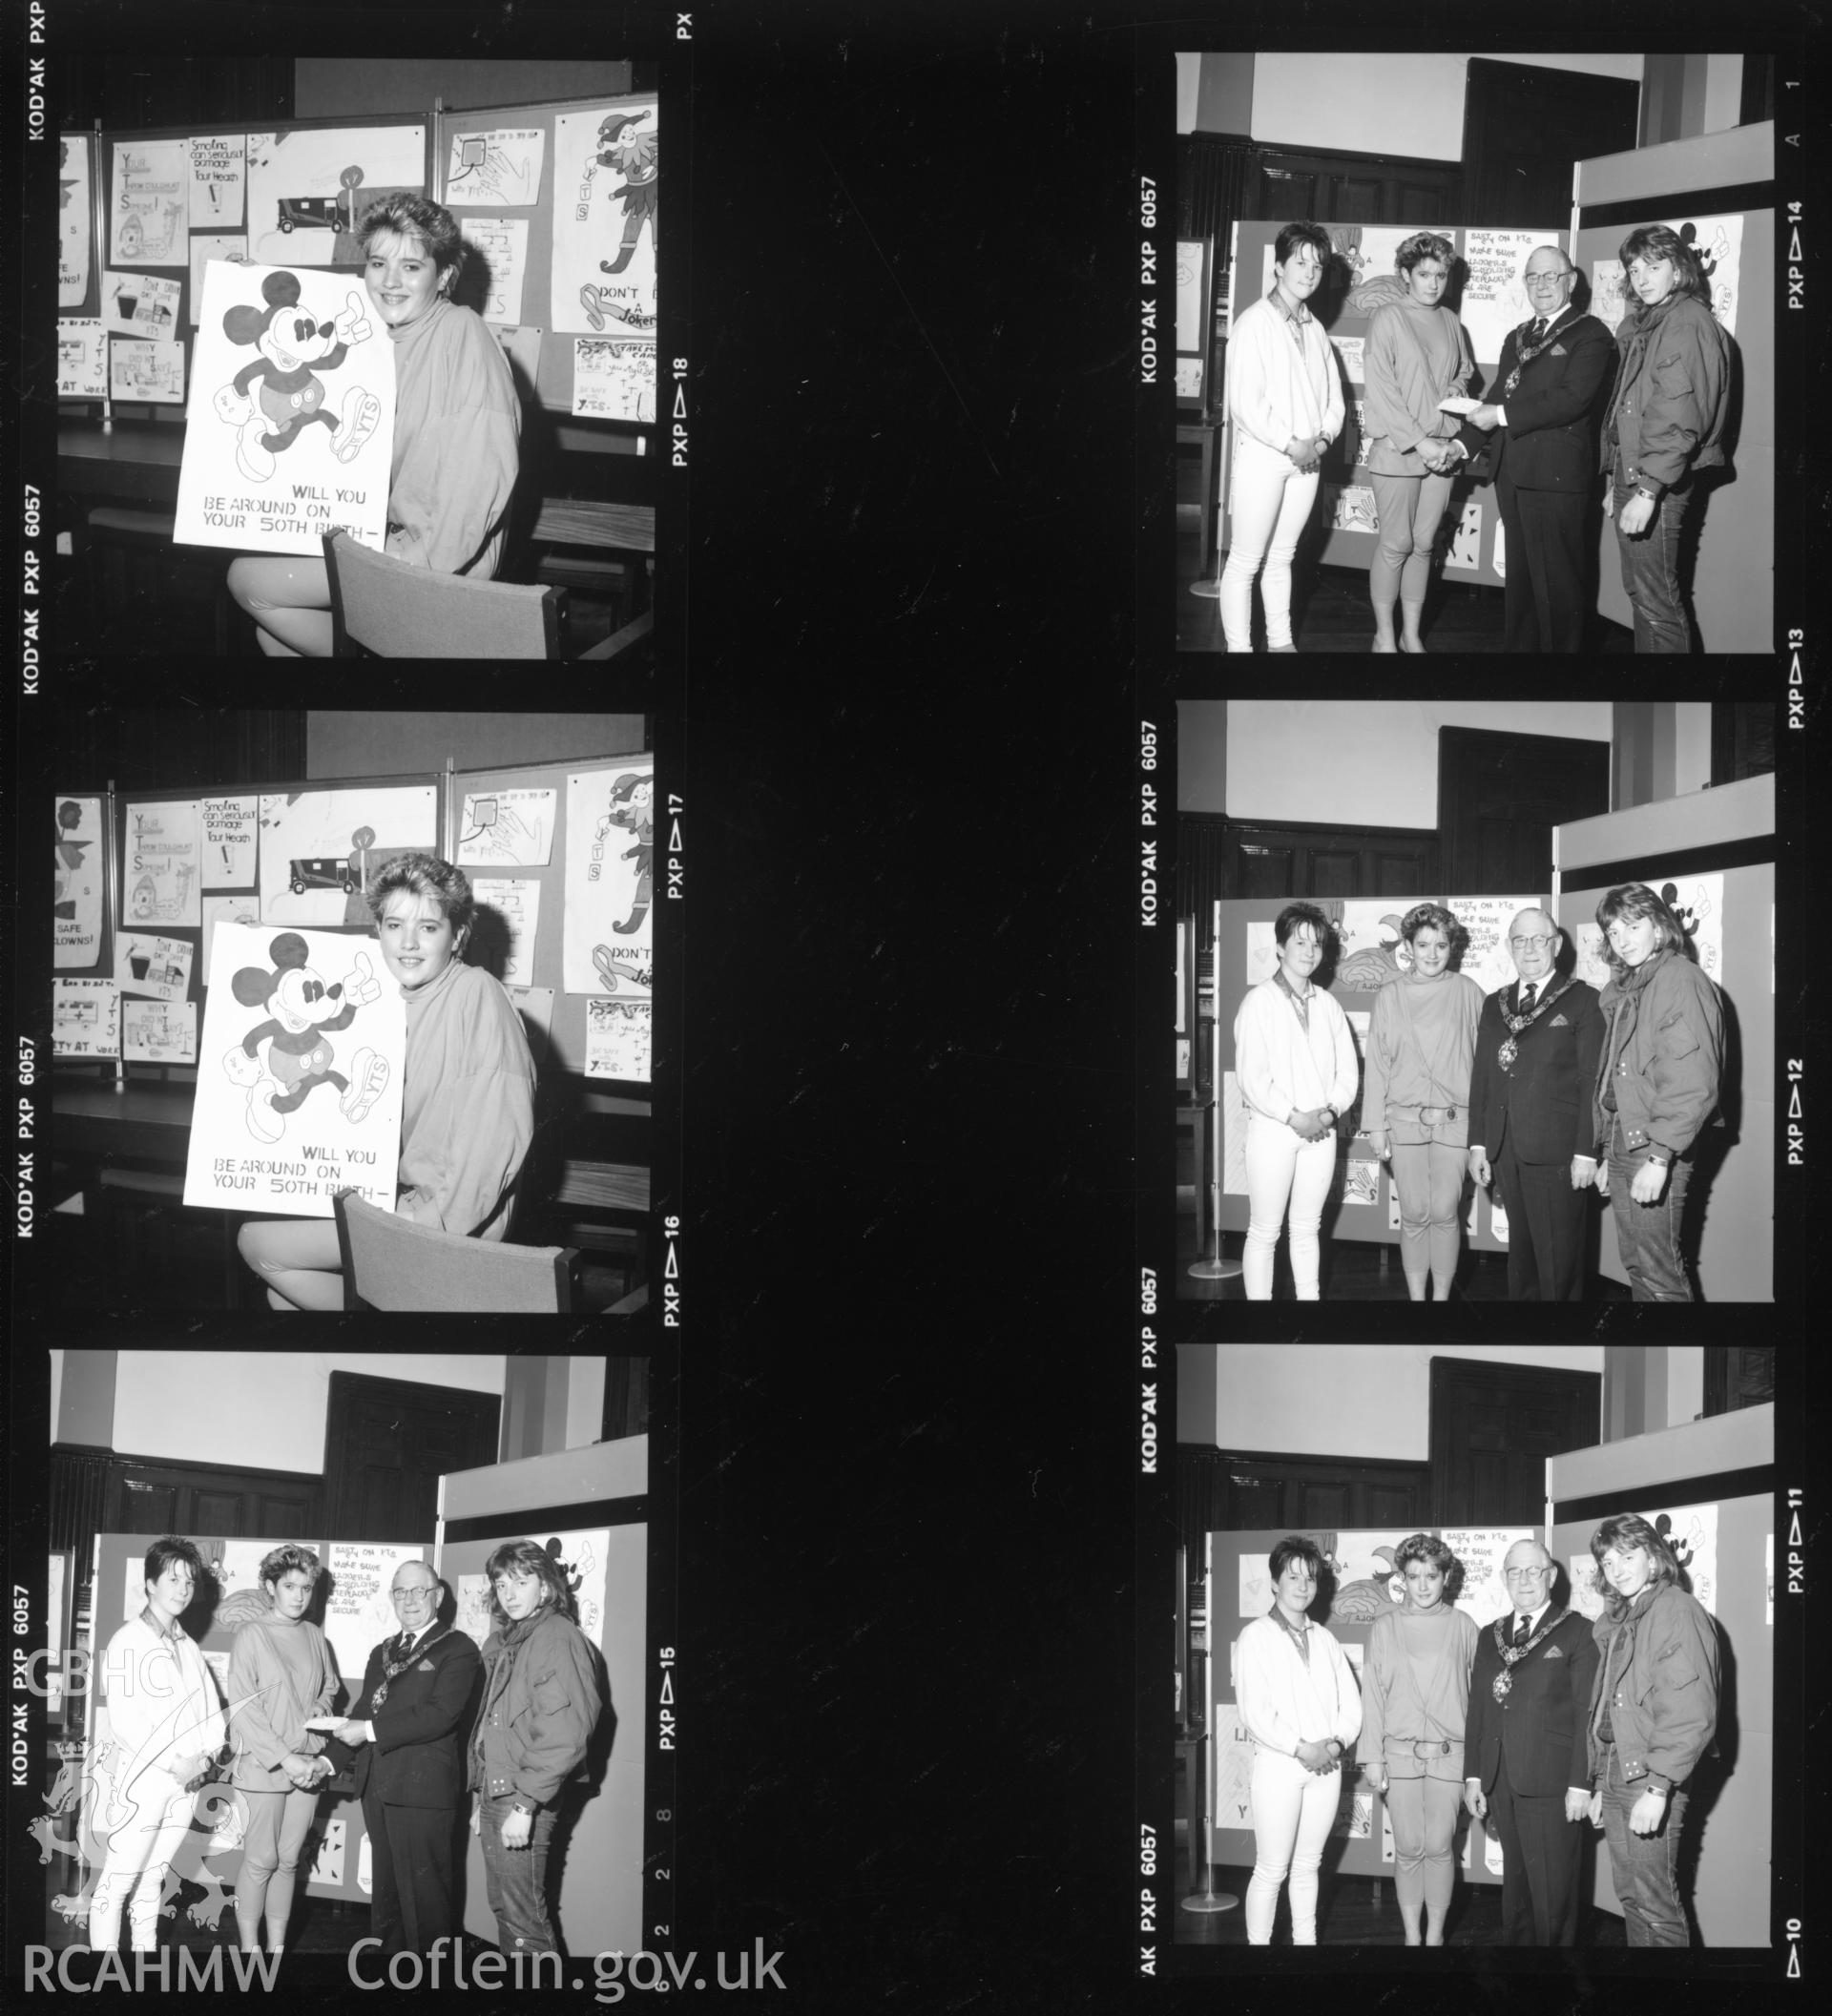 Contact sheet 1b of presentations for the poster competition at Llanelli Town Hall in 1986. From the Central Office of Information Collection.